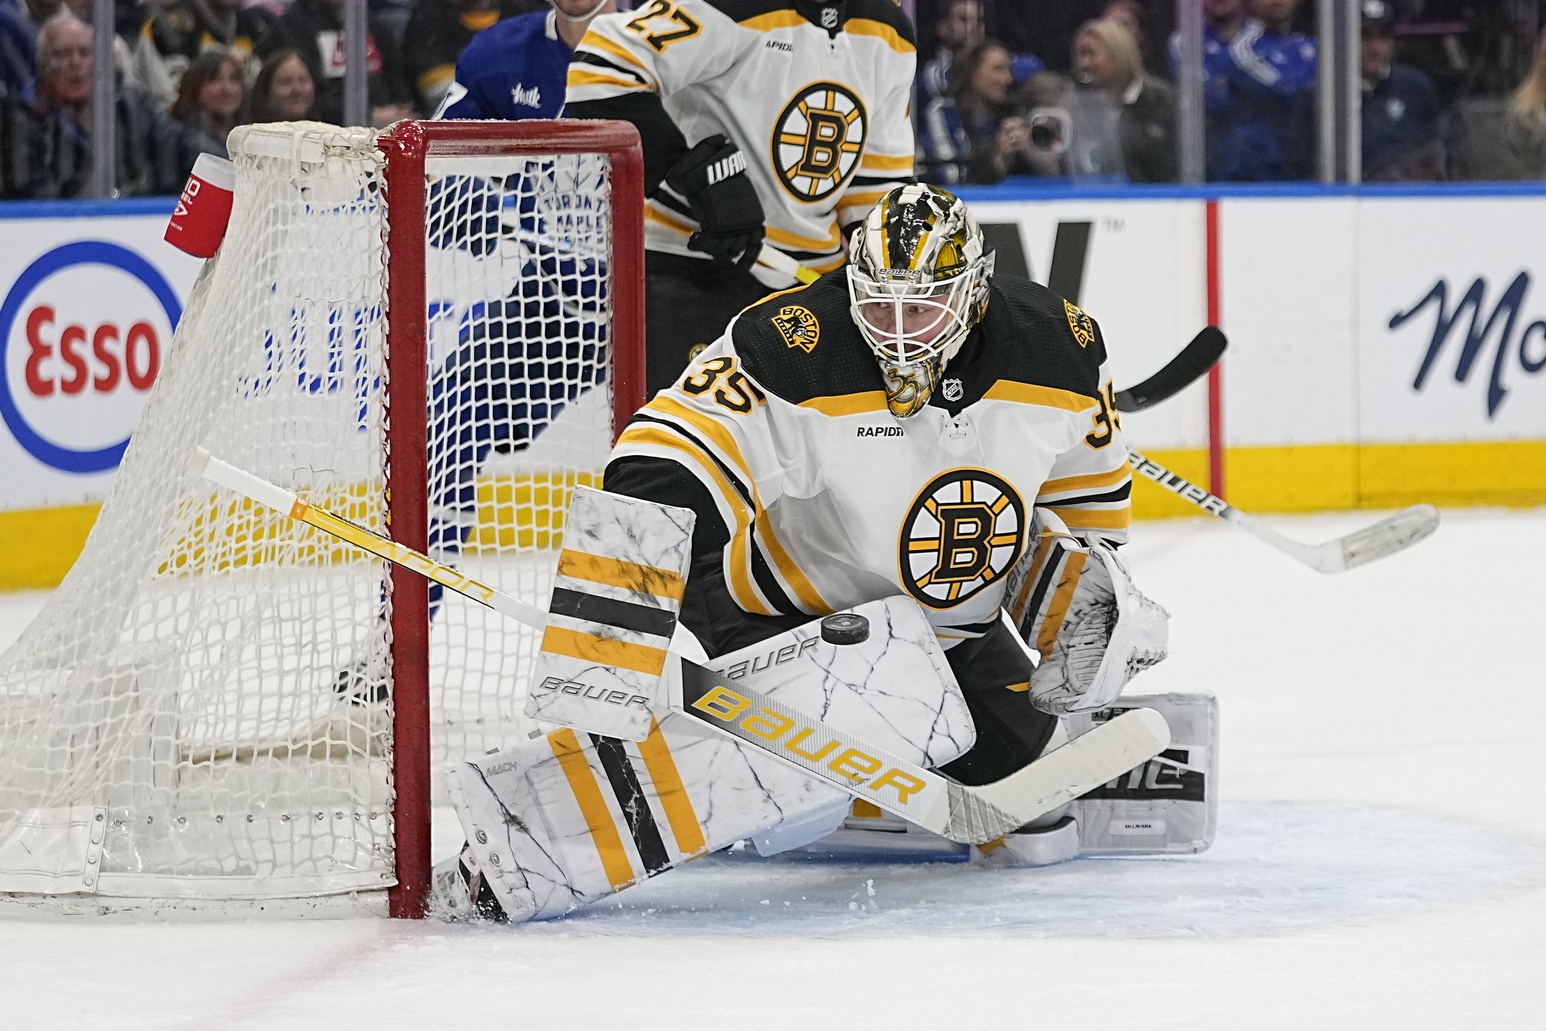 Feb 1, 2023; Toronto, Ontario, CAN; Boston Bruins goaltender Linus Ullmark (35) makes a save against the Toronto Maple Leafs during the first period at Scotiabank Arena. Mandatory Credit: John E. Sokolowski/USA TODAY Sports